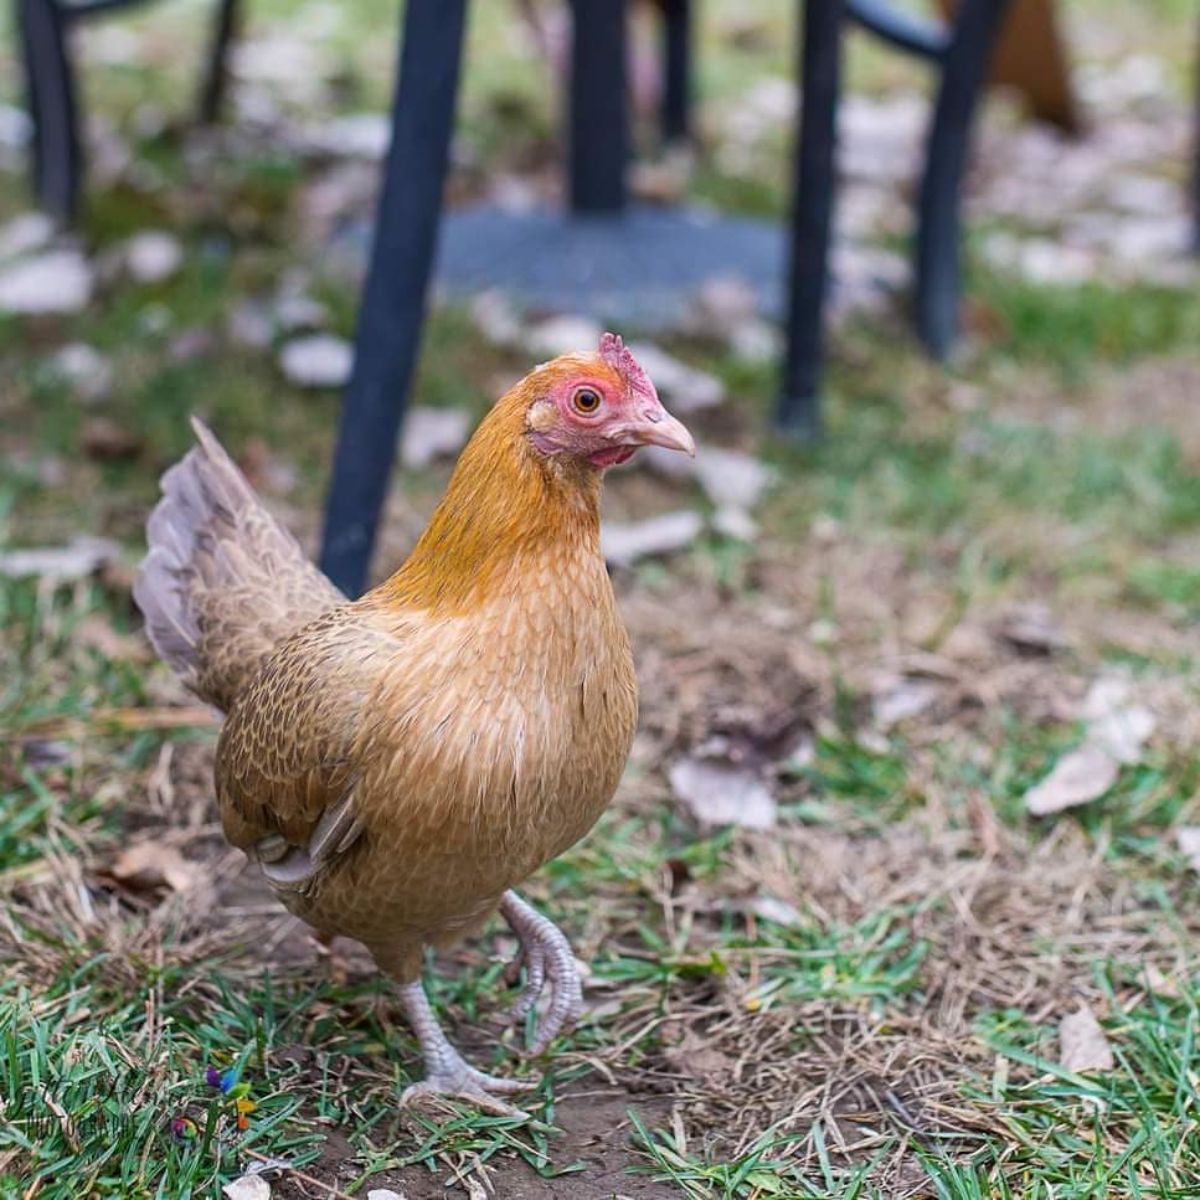 An adorable brown Old English Game hen in a backyard.